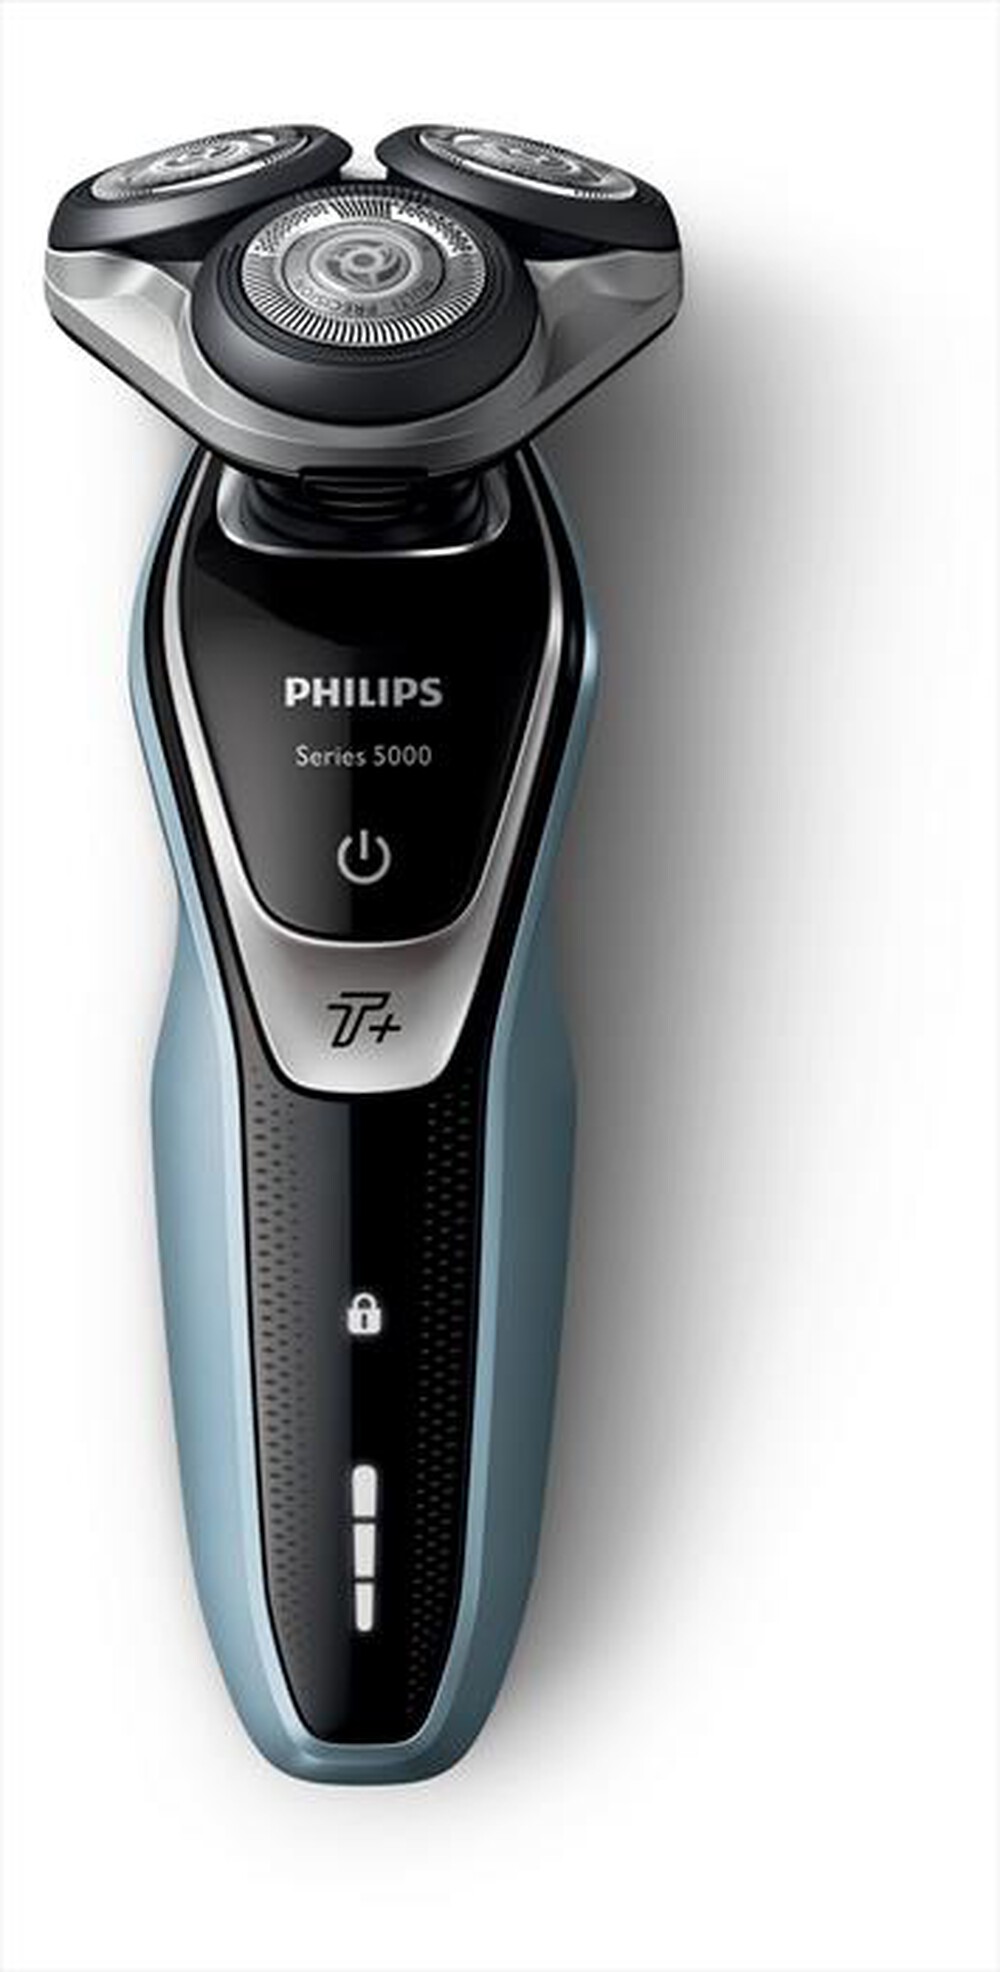 "PHILIPS - SHAVER SERIES 5000 S5530/08 - "